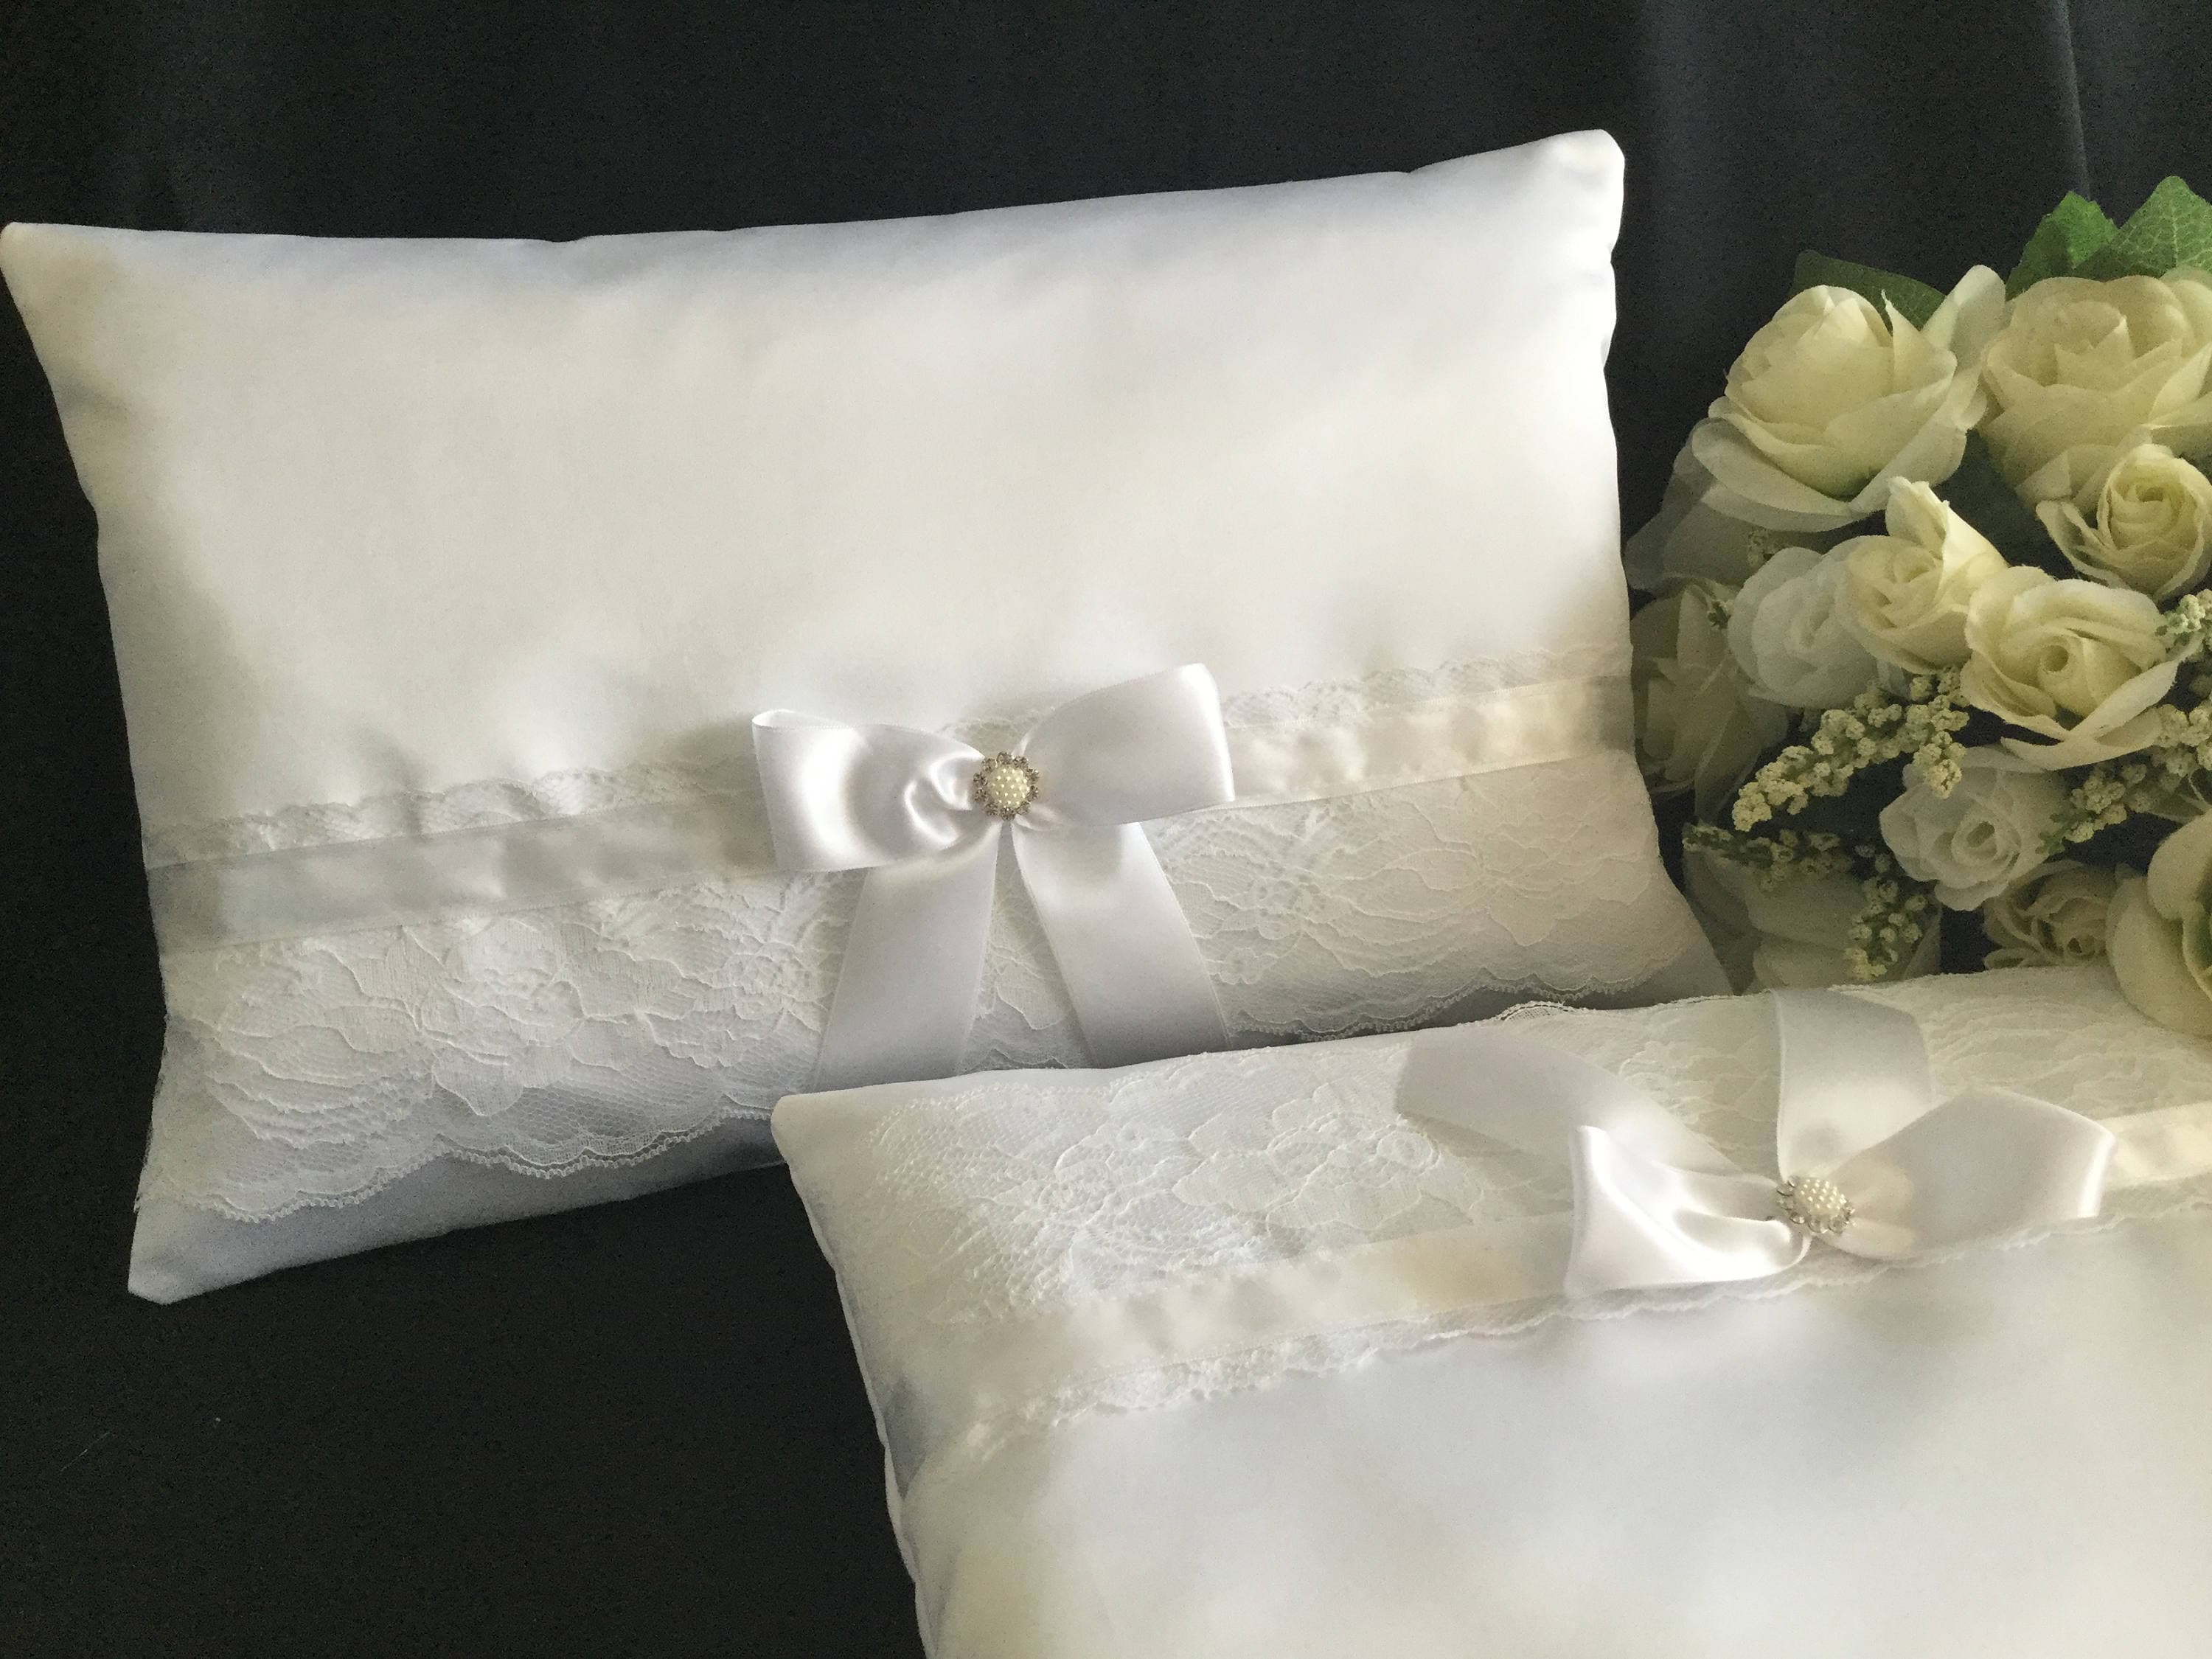 Prayer pillows Vintage style ceremony pillows Set of 3 wedding kneeling pillows and ring pillow with beautiful lace and bow in ivory color